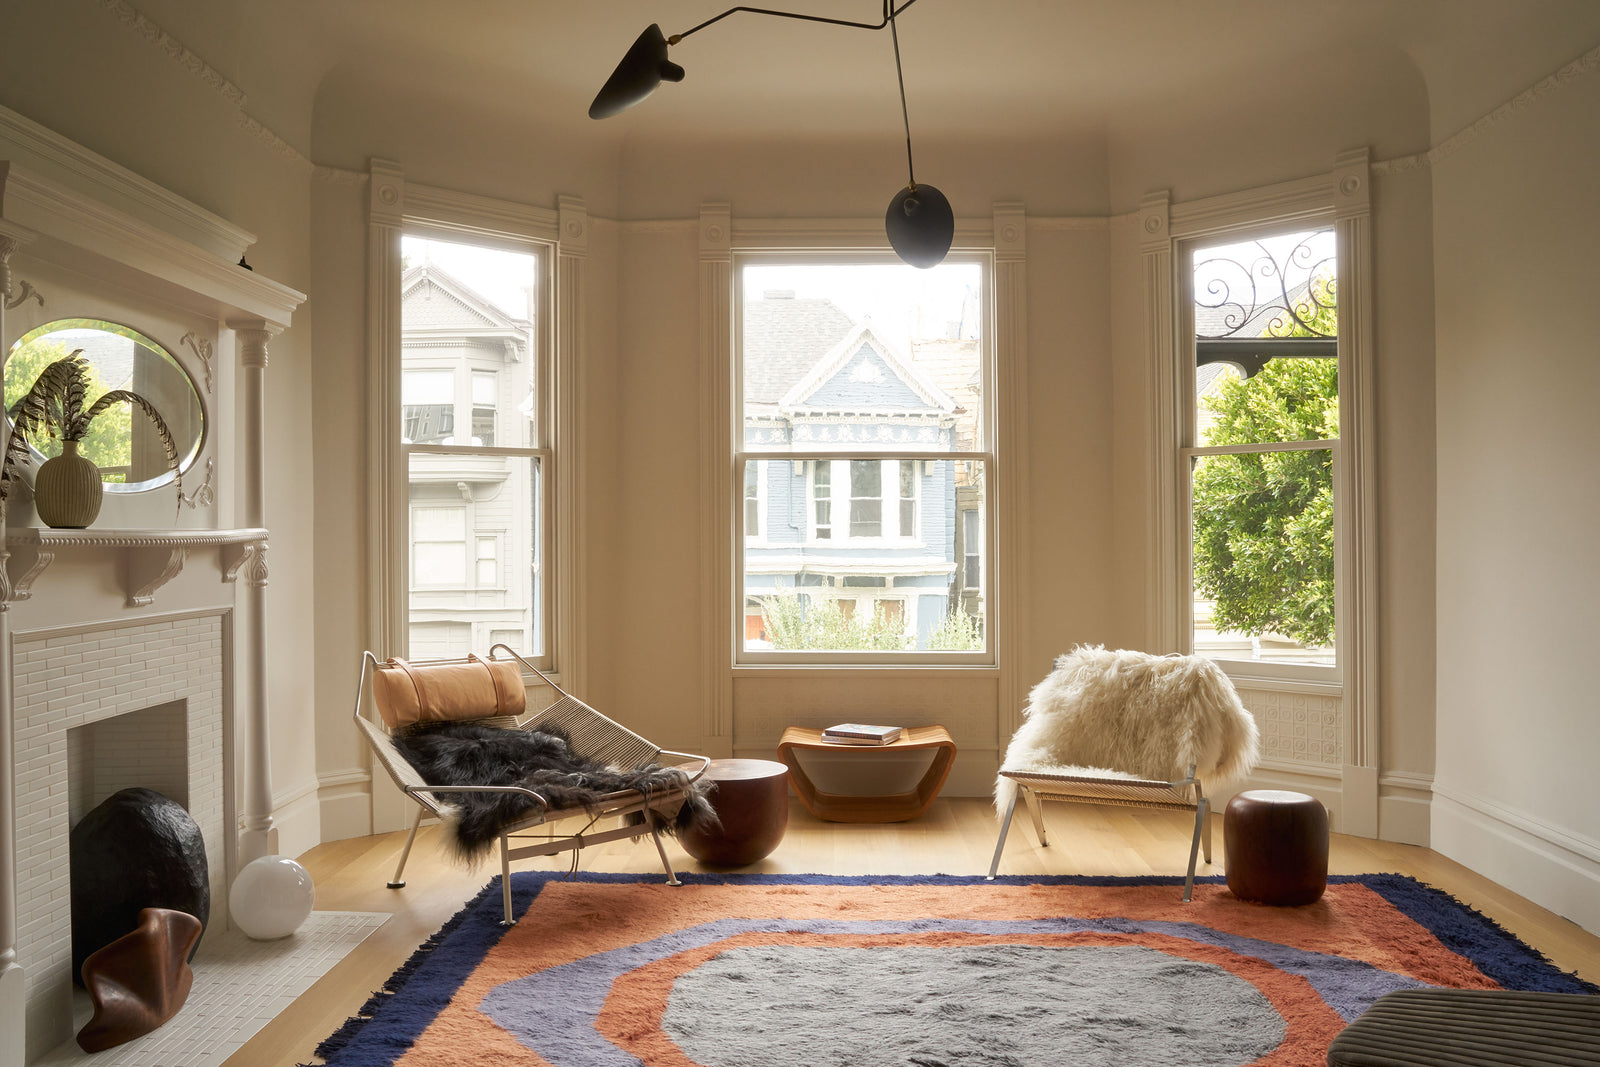 How To Select The Right Rug For Your